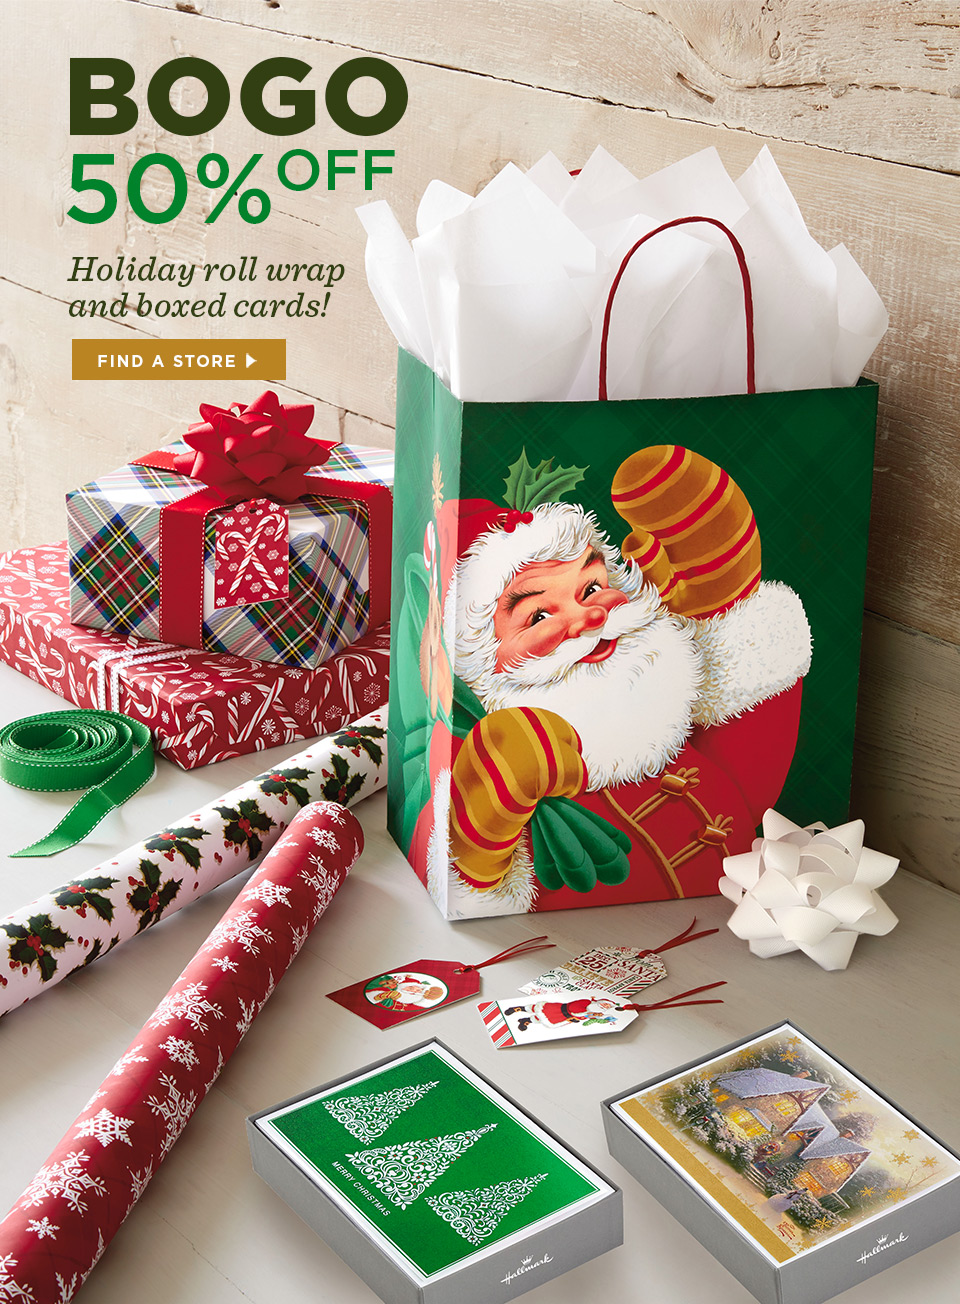 BOGO 50% OFF - Holiday roll wrap and boxed cards!